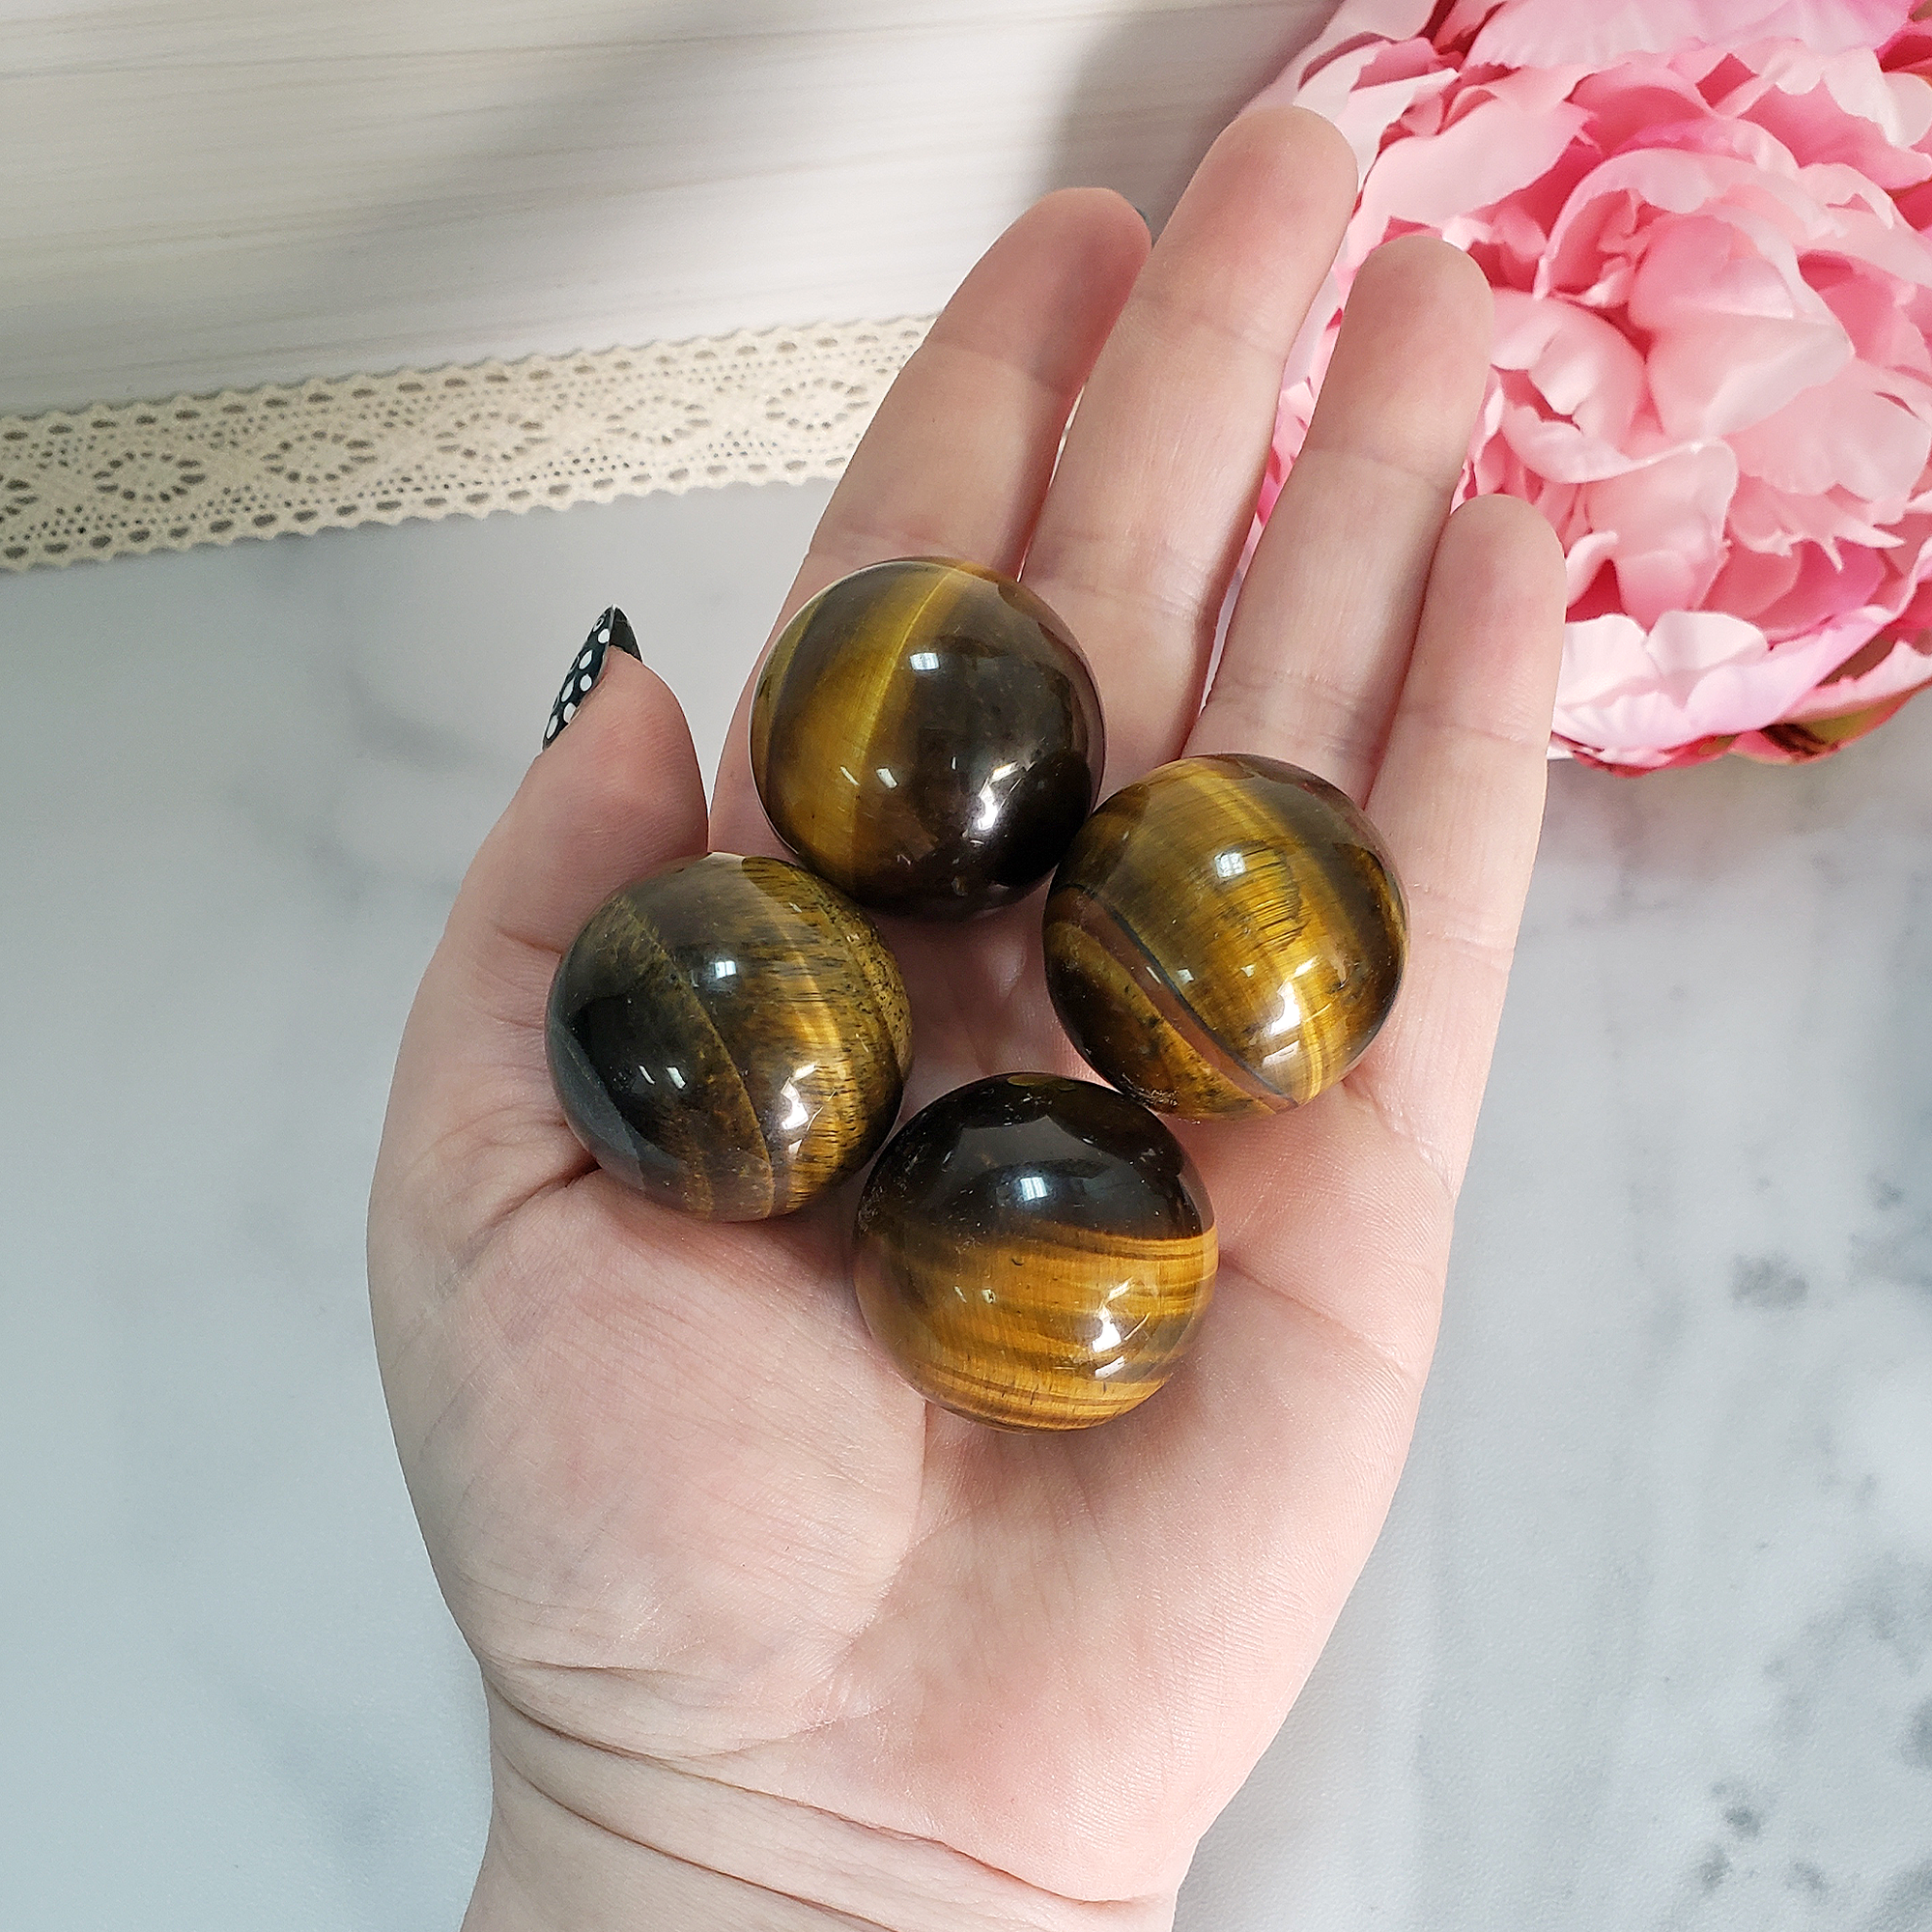 Tigers Eye Natural Crystal Sphere Gemstone Orb - One 30mm Sphere - Tiger Eye Orbs Grouped Together on Palm